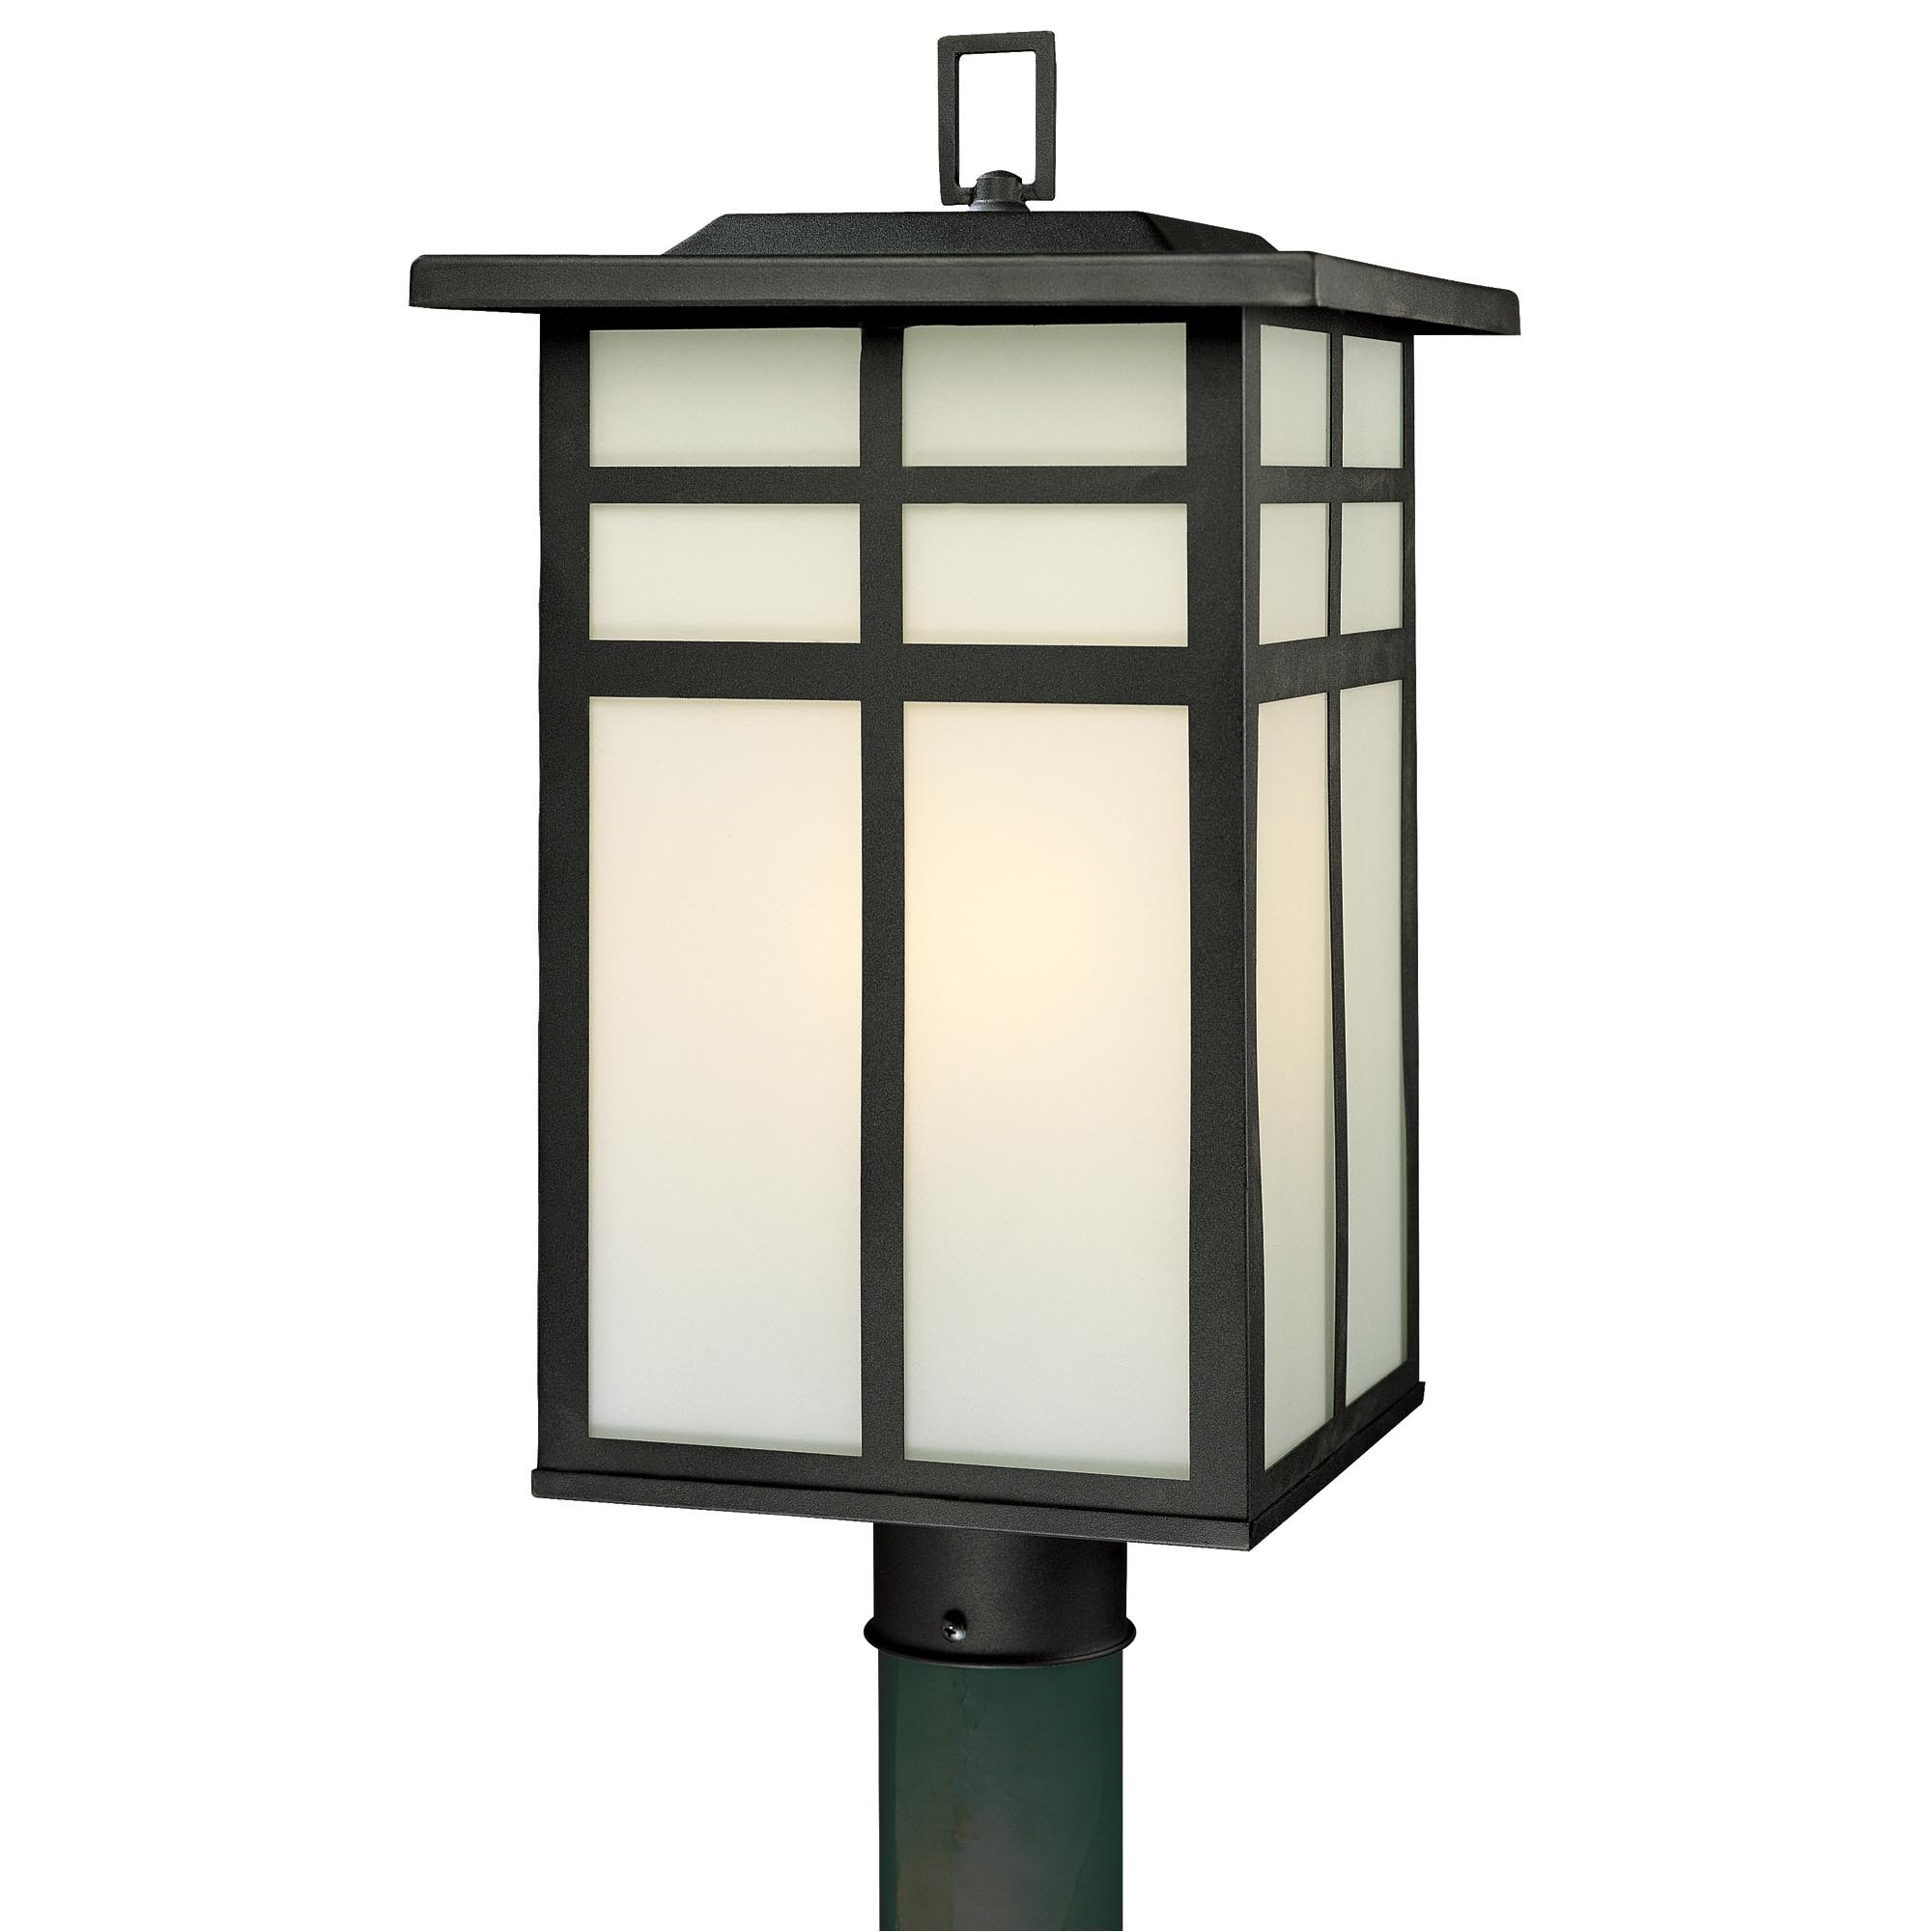 Innova lighting led 3-light outdoor lamp post - beauty and an amazing